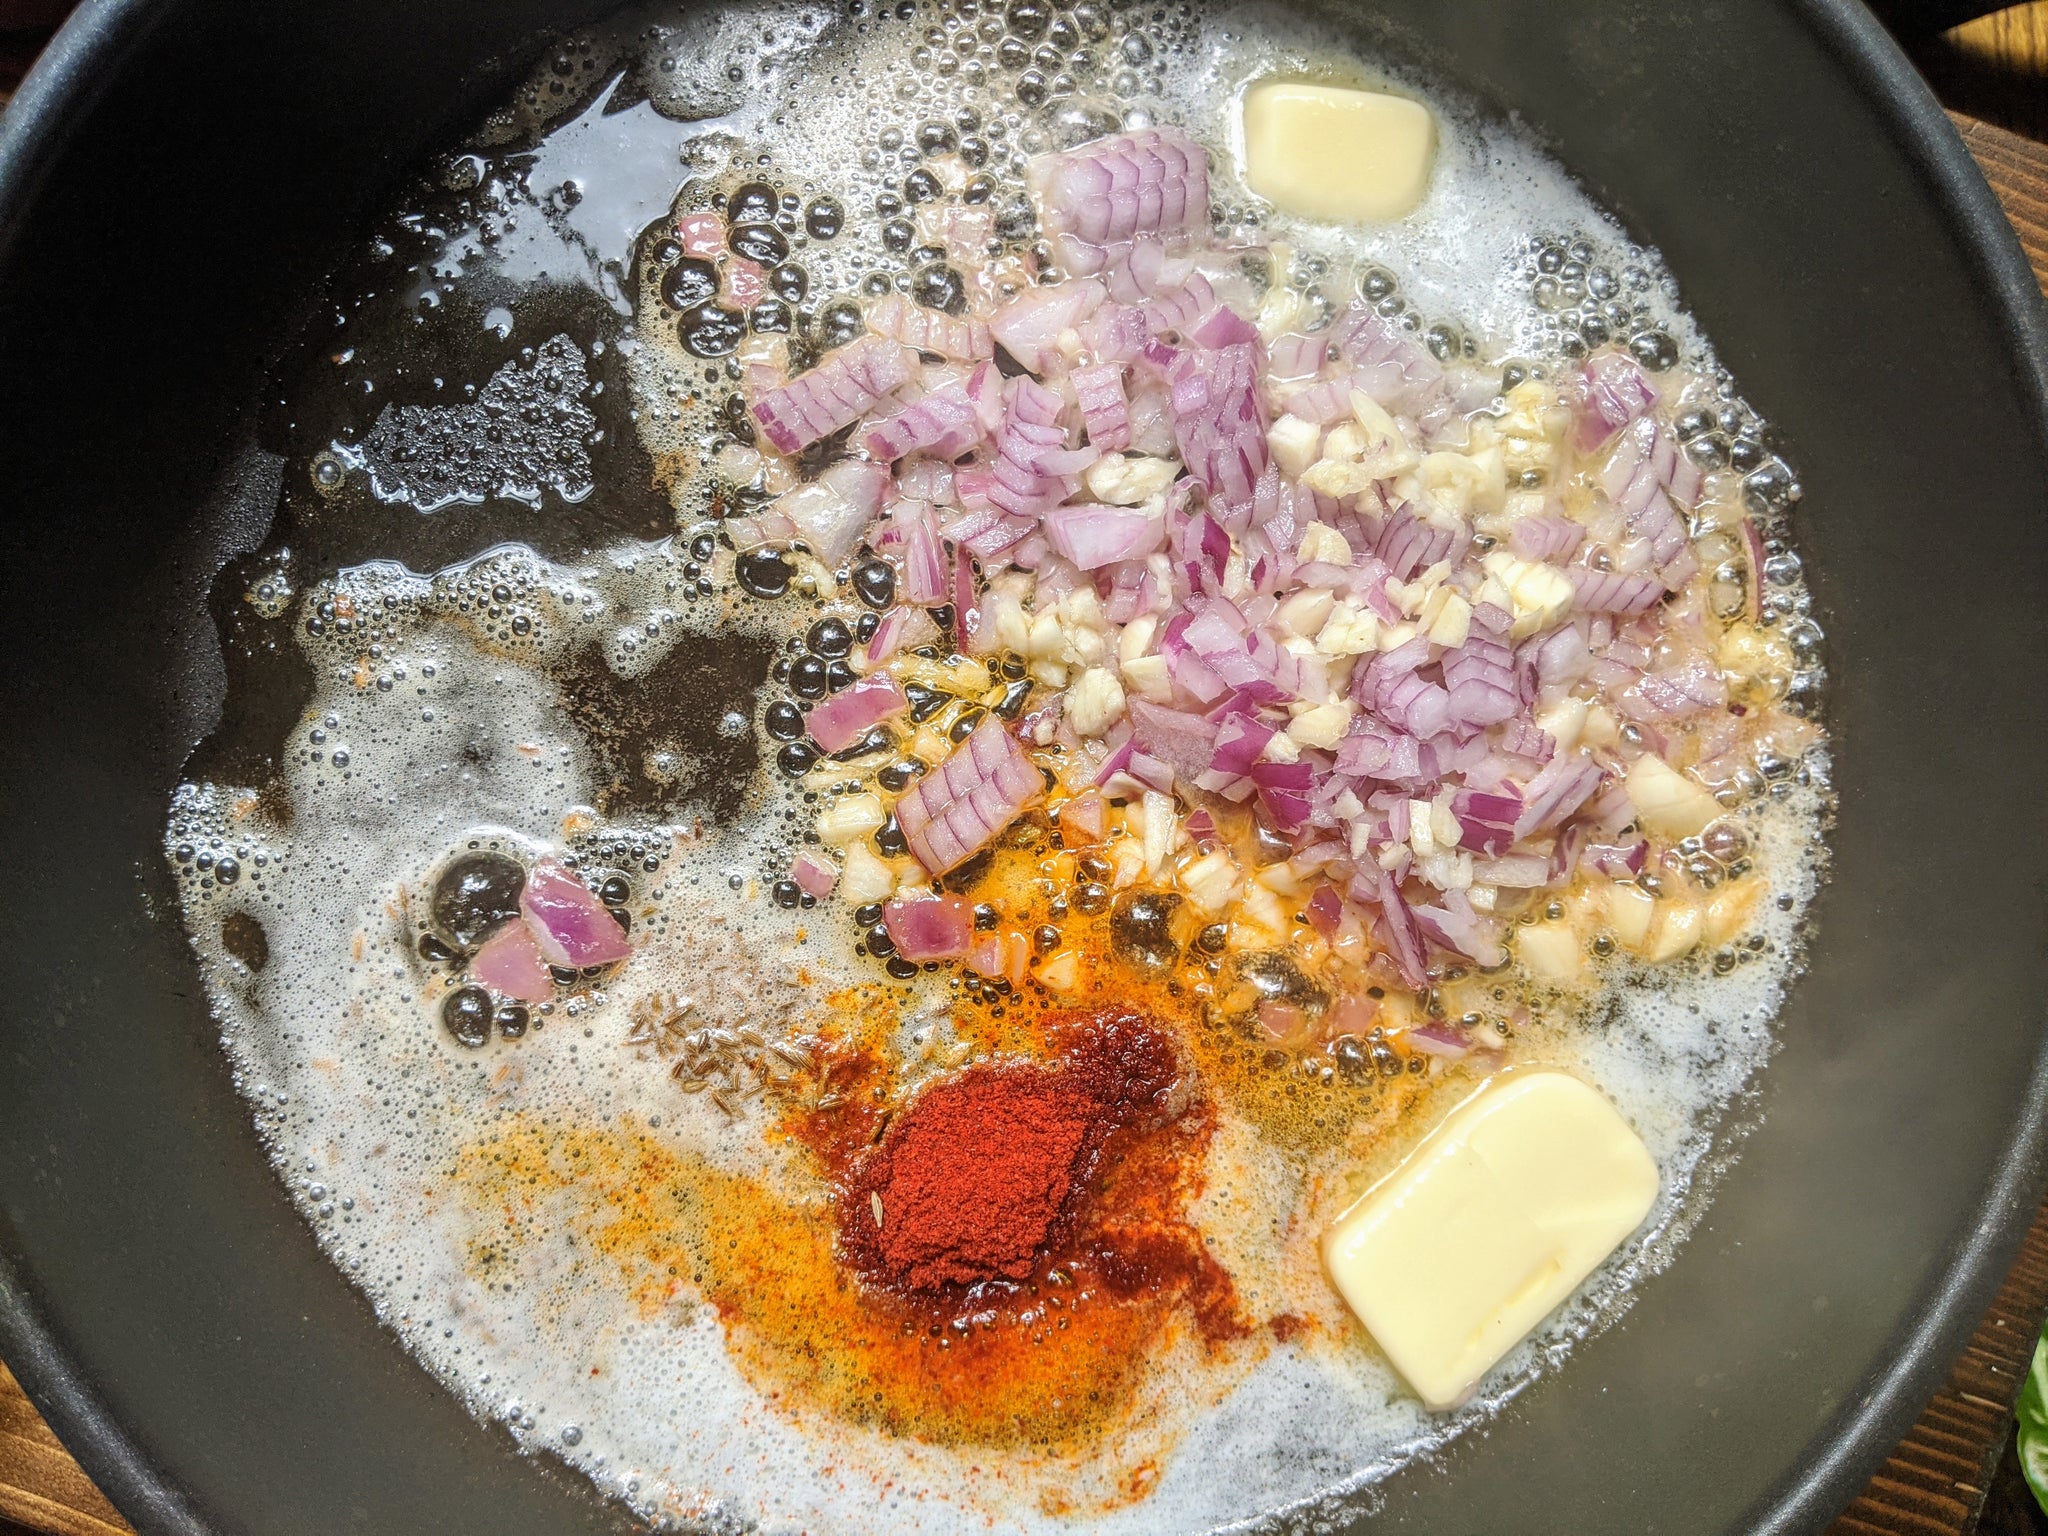 Sauteing SpiceFix cumin seeds and Kashmiri chili powder in butter